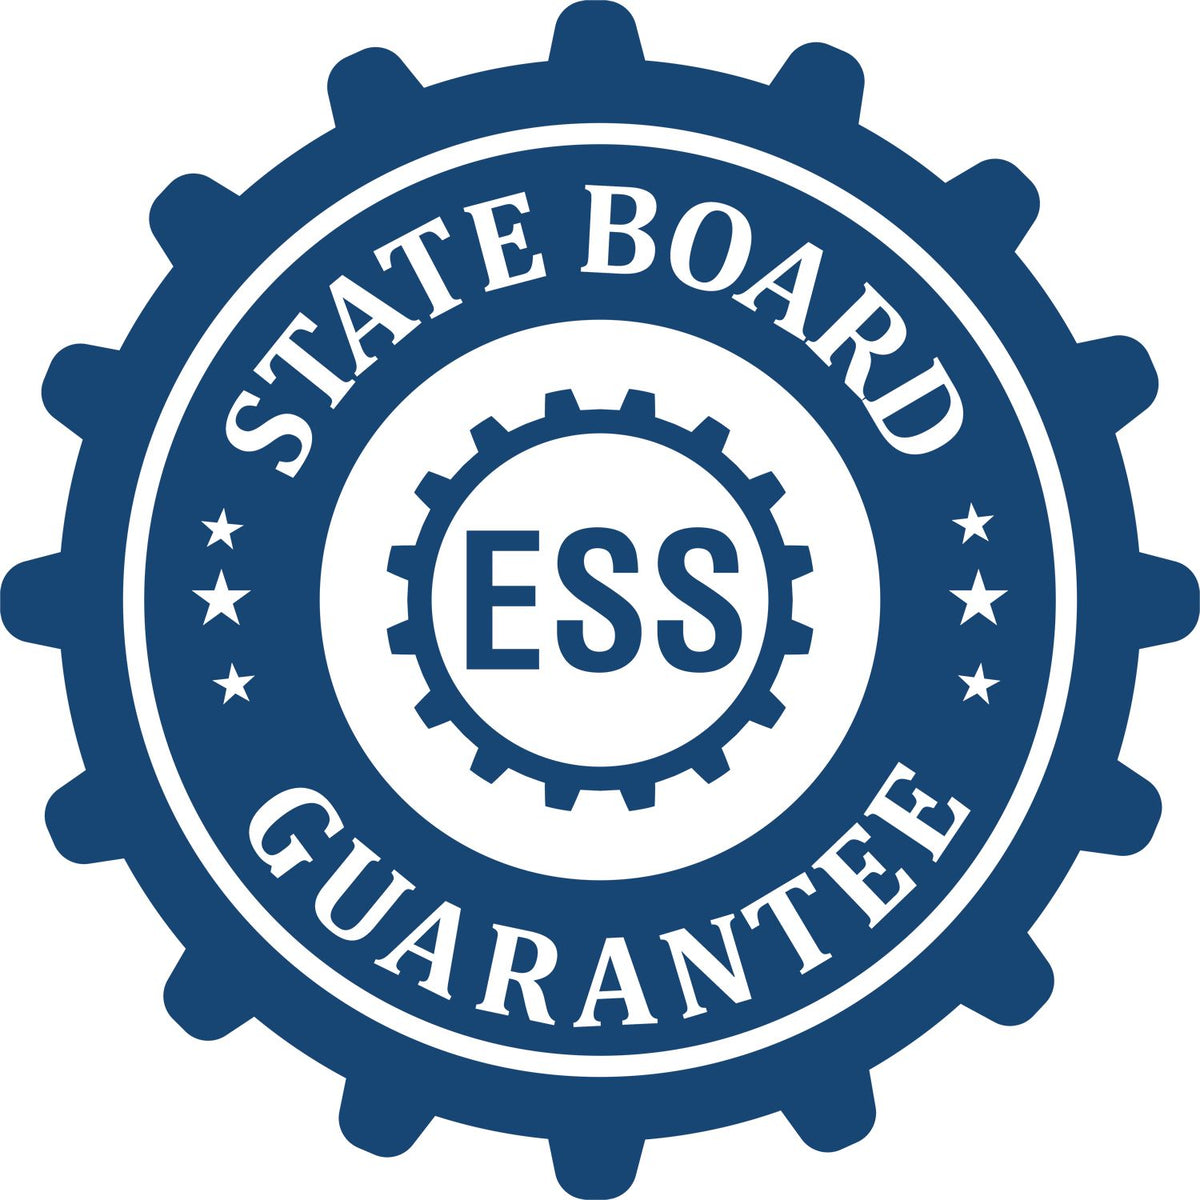 An emblem in a gear shape illustrating a state board guarantee for the Premium MaxLight Pre-Inked Arkansas Engineering Stamp product.